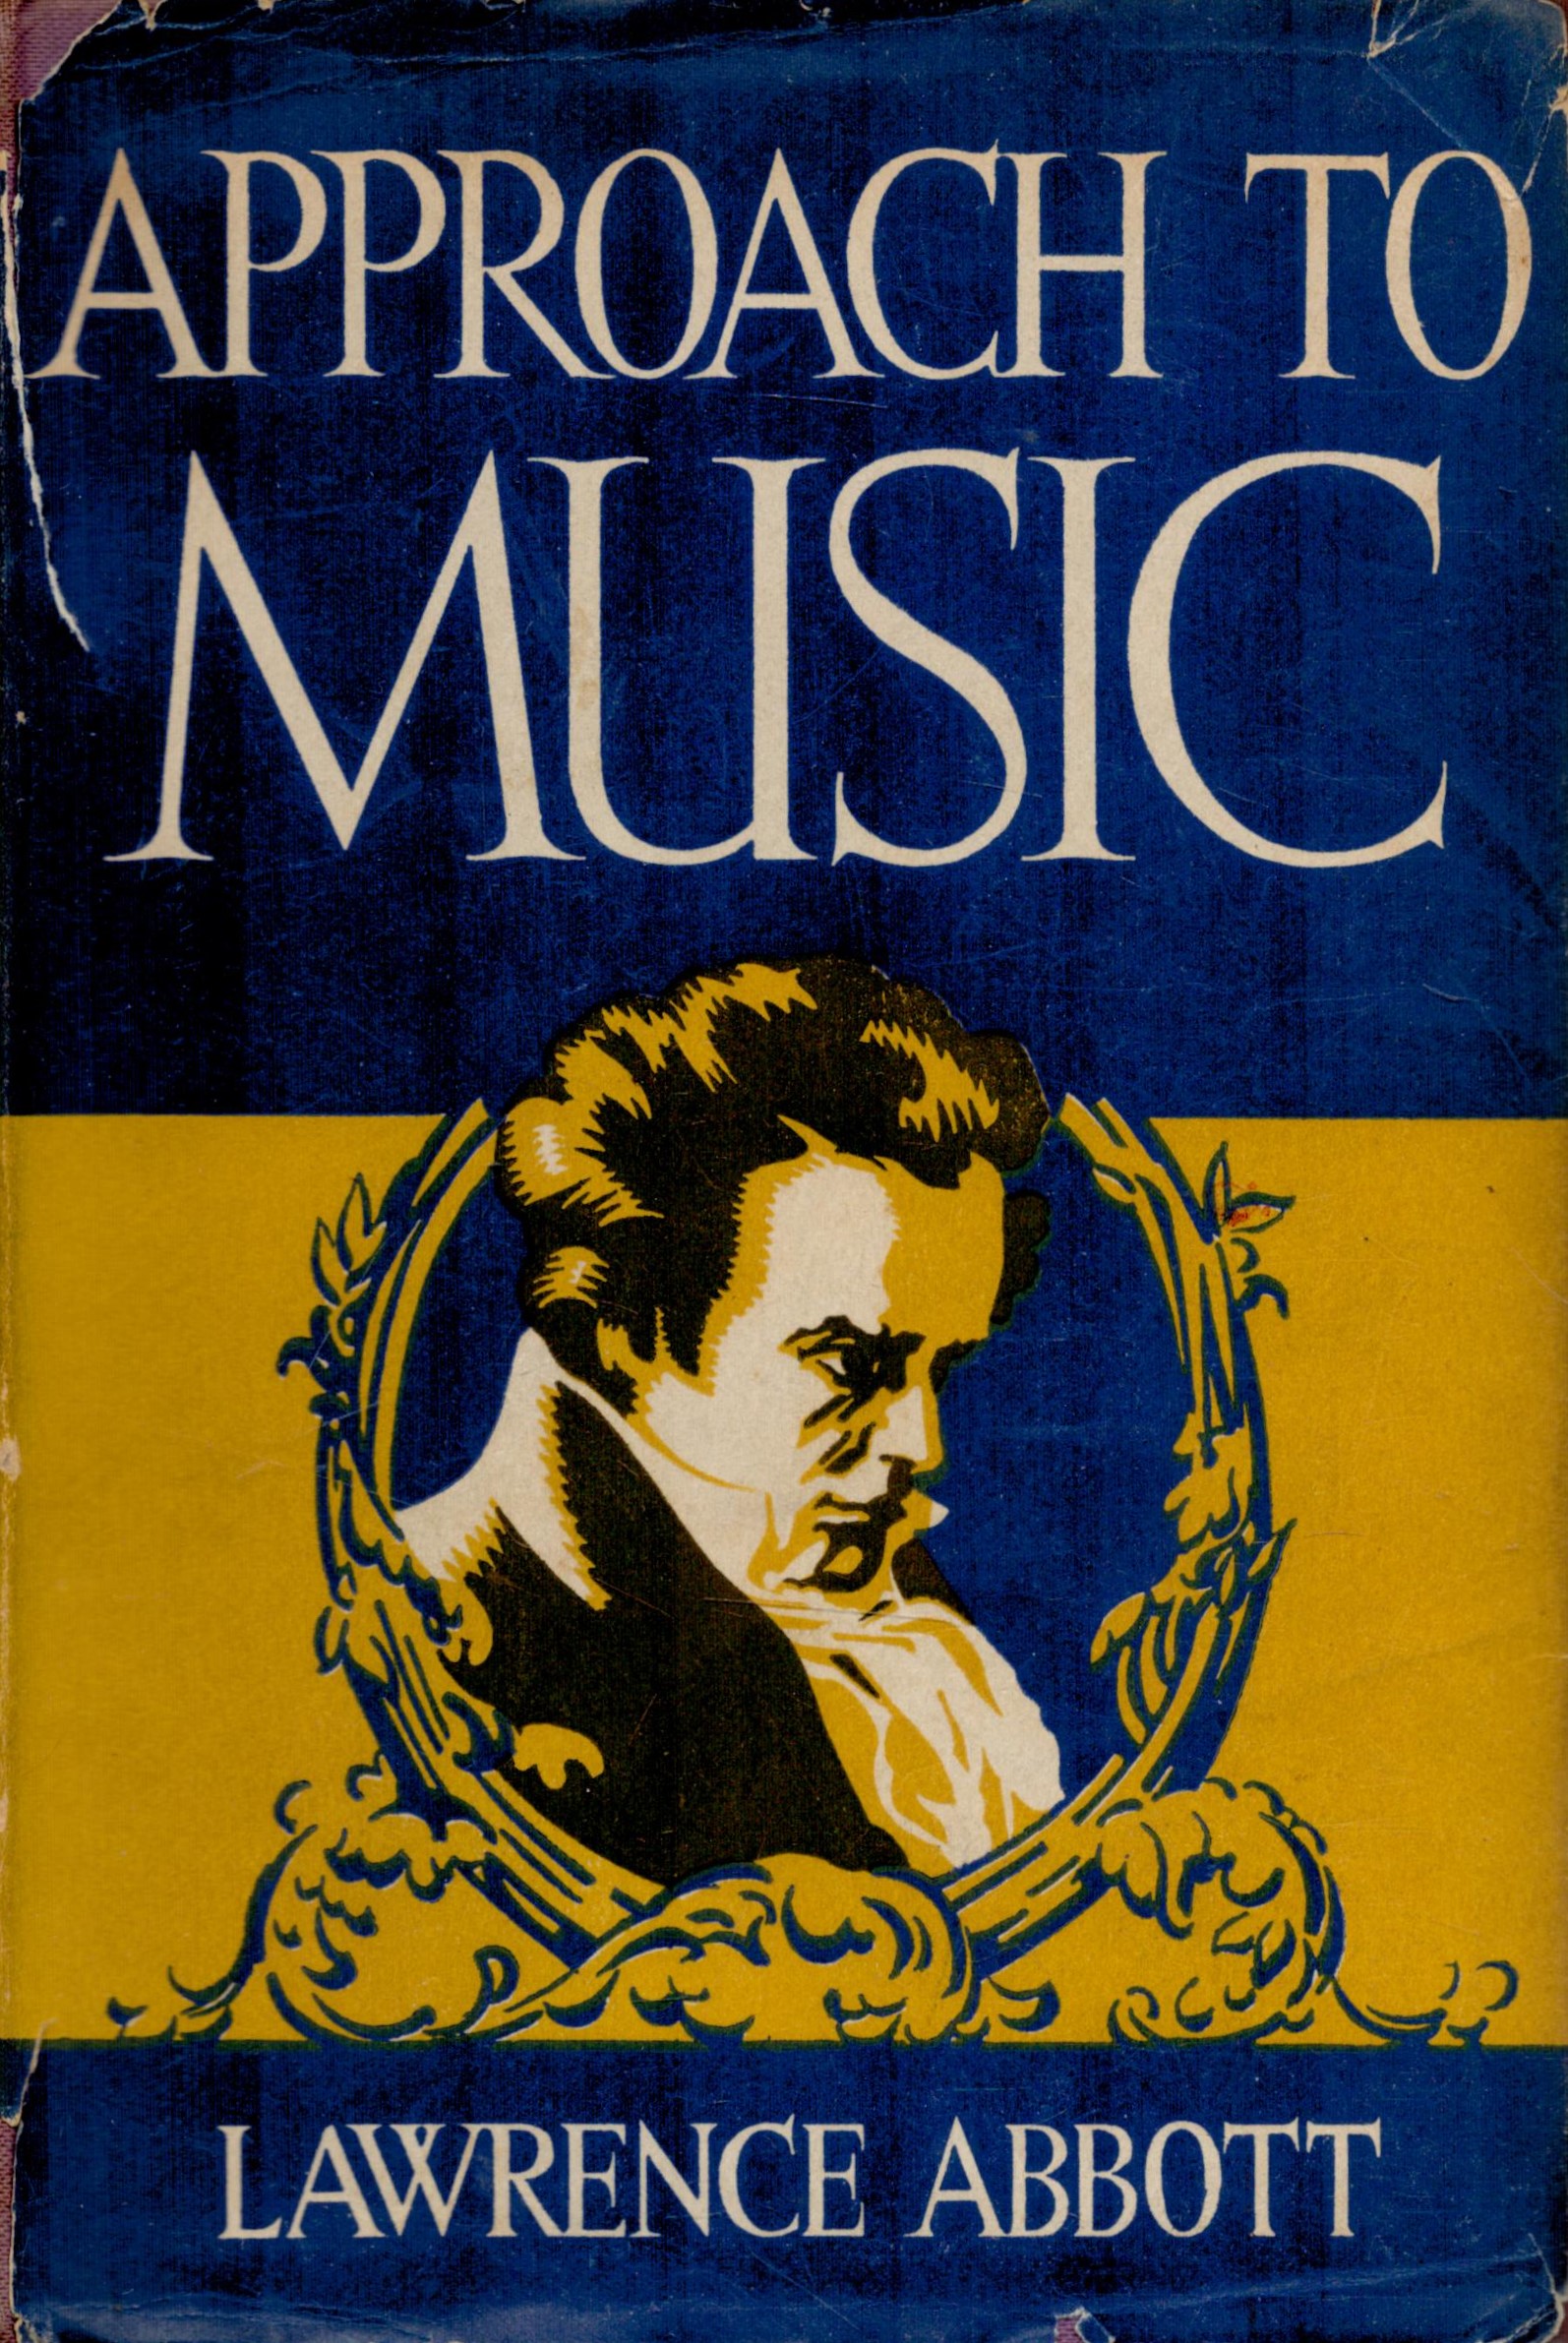 Approach To Music by Lawrence Abbott 1943 edition unknown Hardback Book with 285 pages published